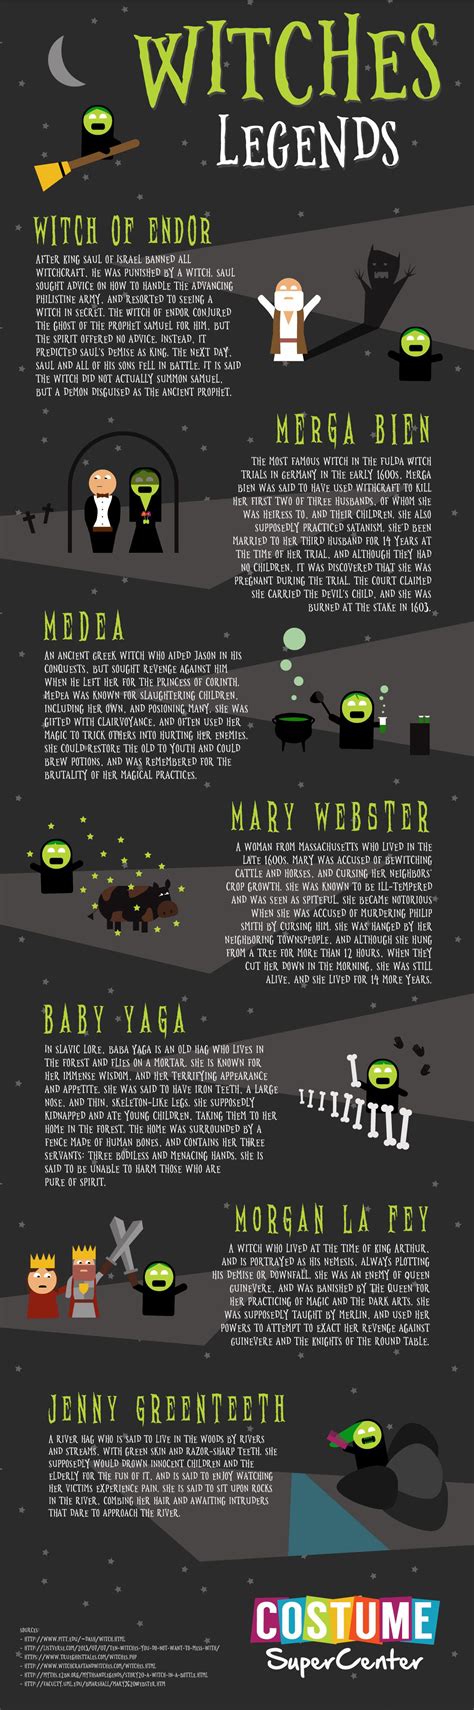 What are witches bllls for infographics